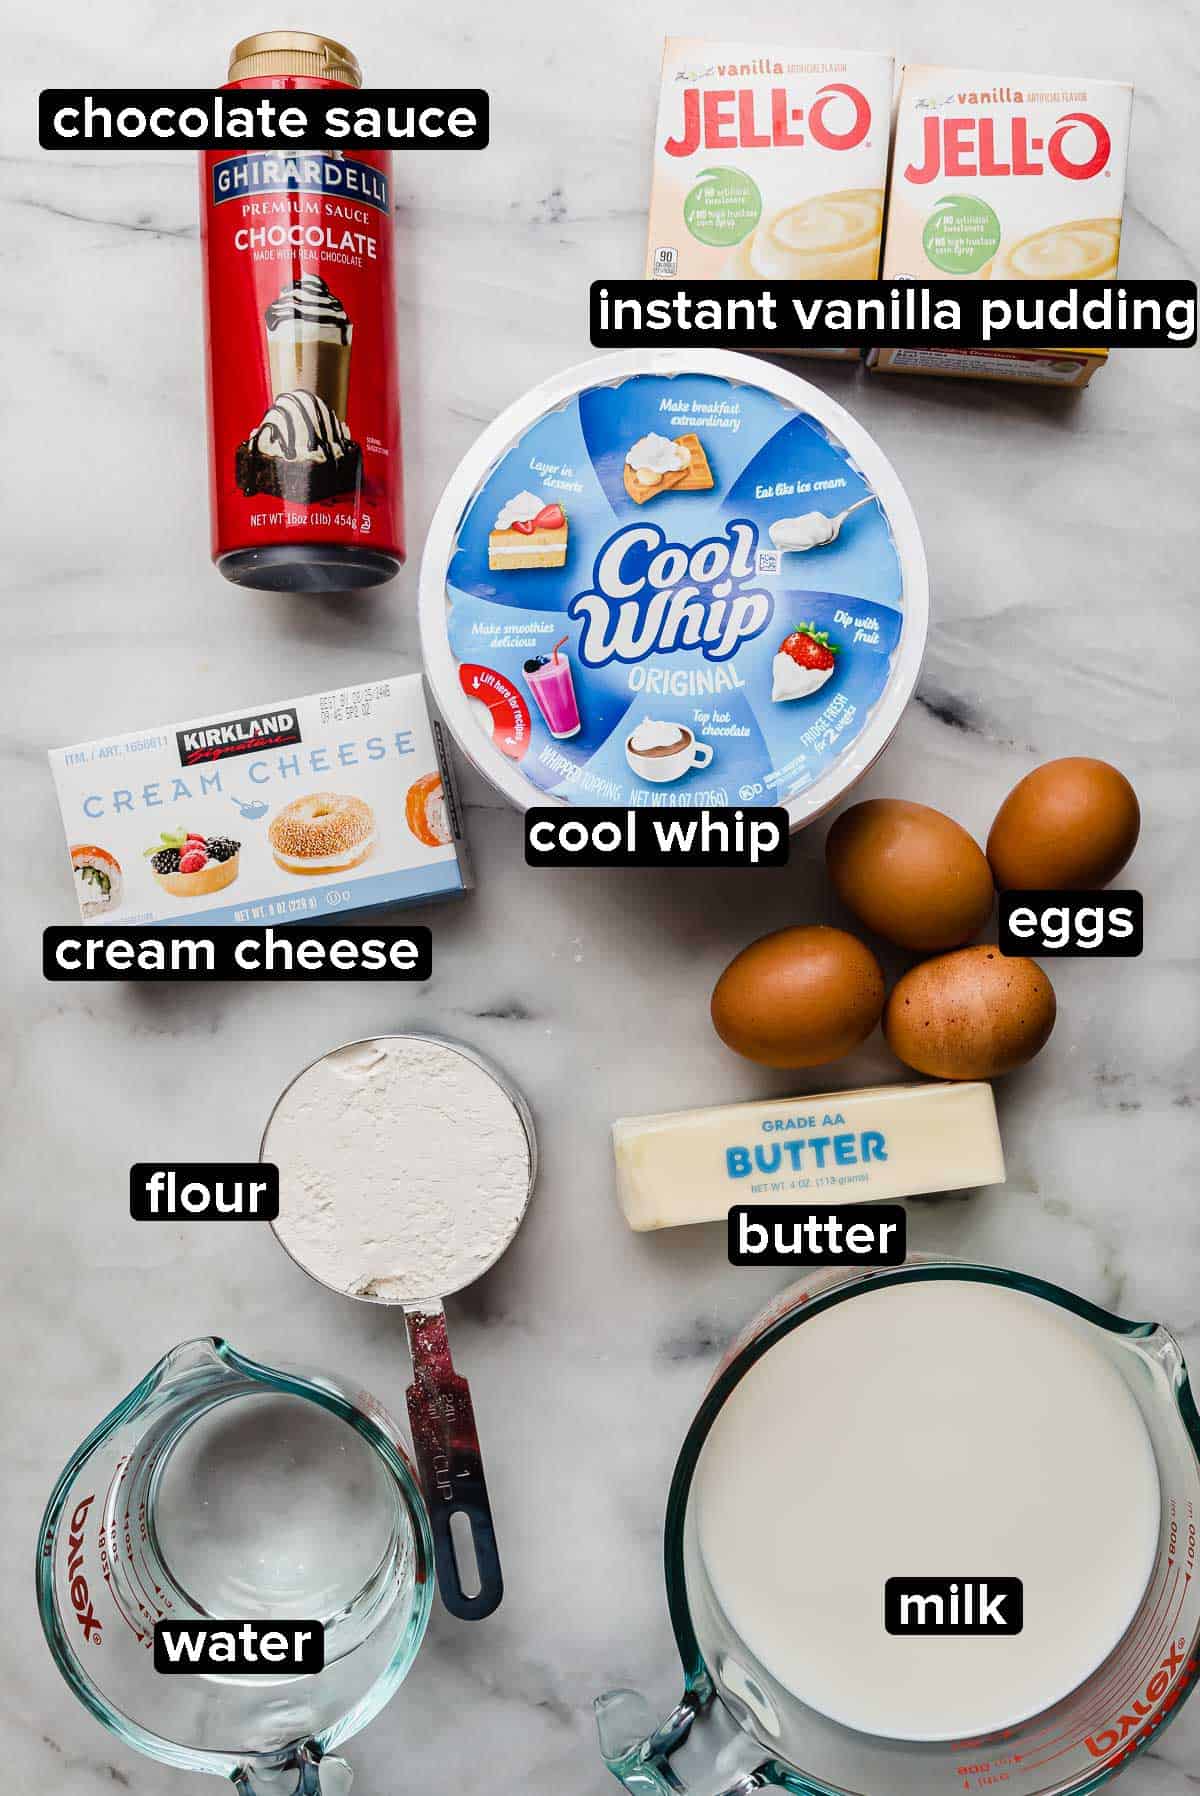 Cream Puff Cake recipe ingredients on a white marble table: instant vanilla pudding packets, cool whip, cream cheese, eggs, milk, water, butter, flour, and chocolate syrup.